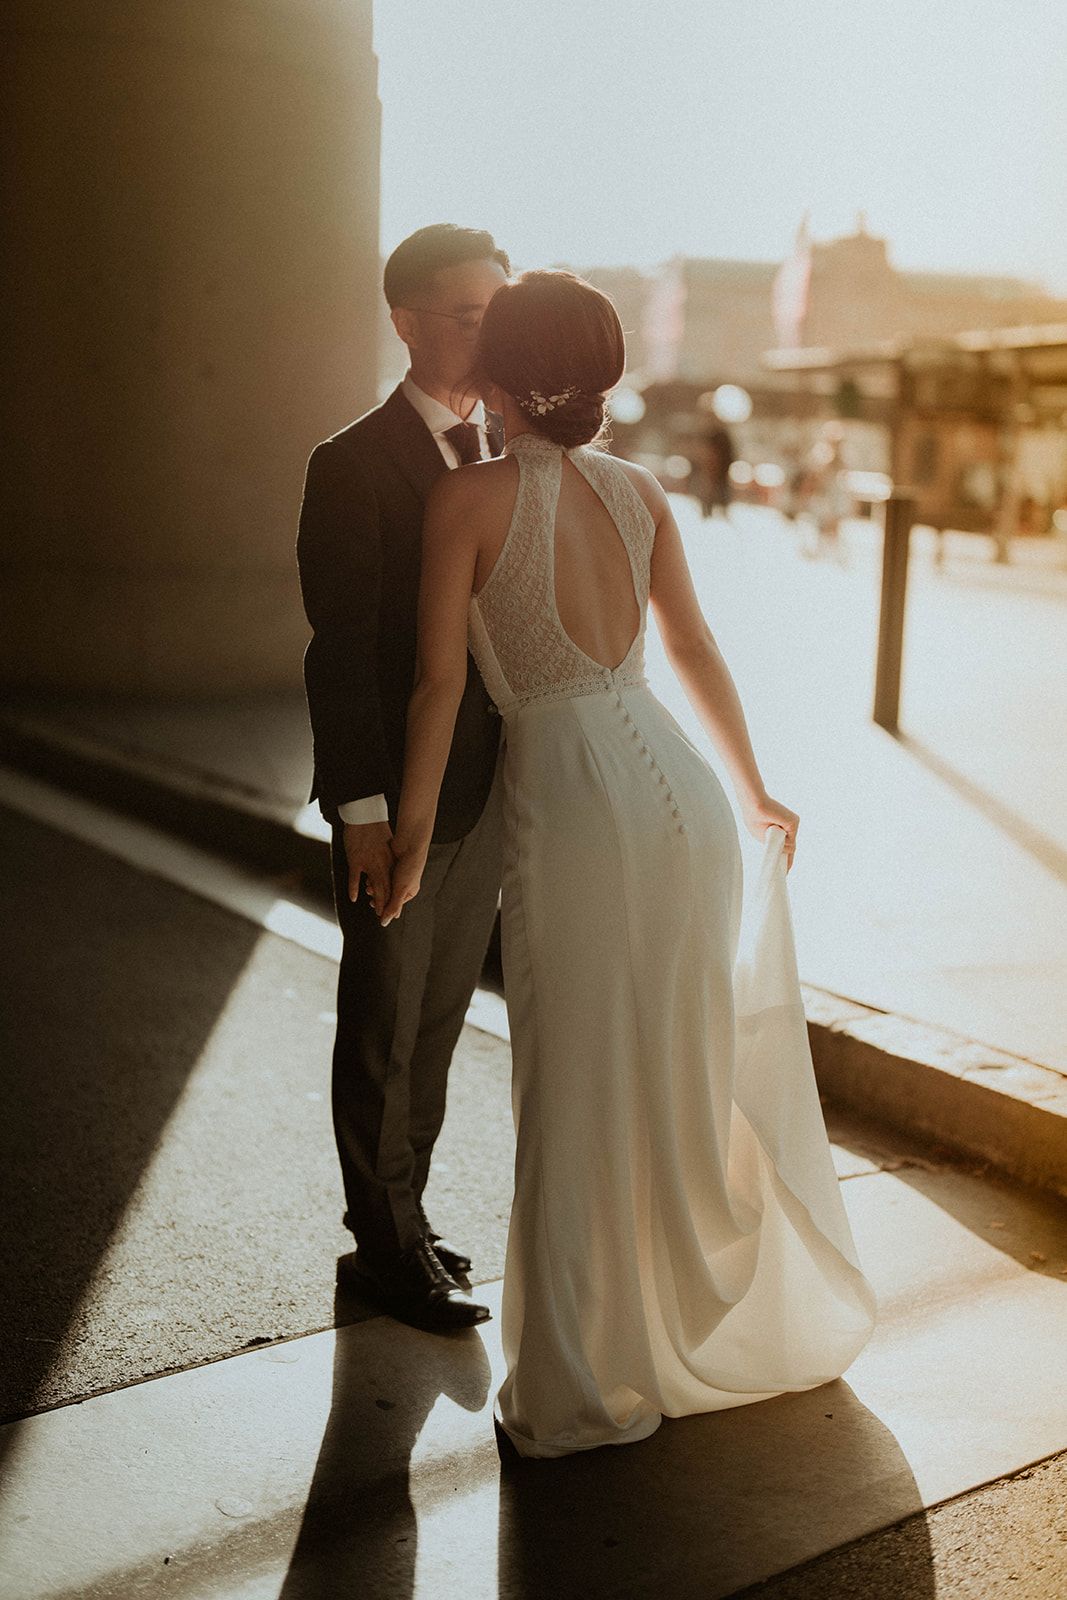 afternoon photograph of the bride and groom with the sun shining behind them, creating a lens flare